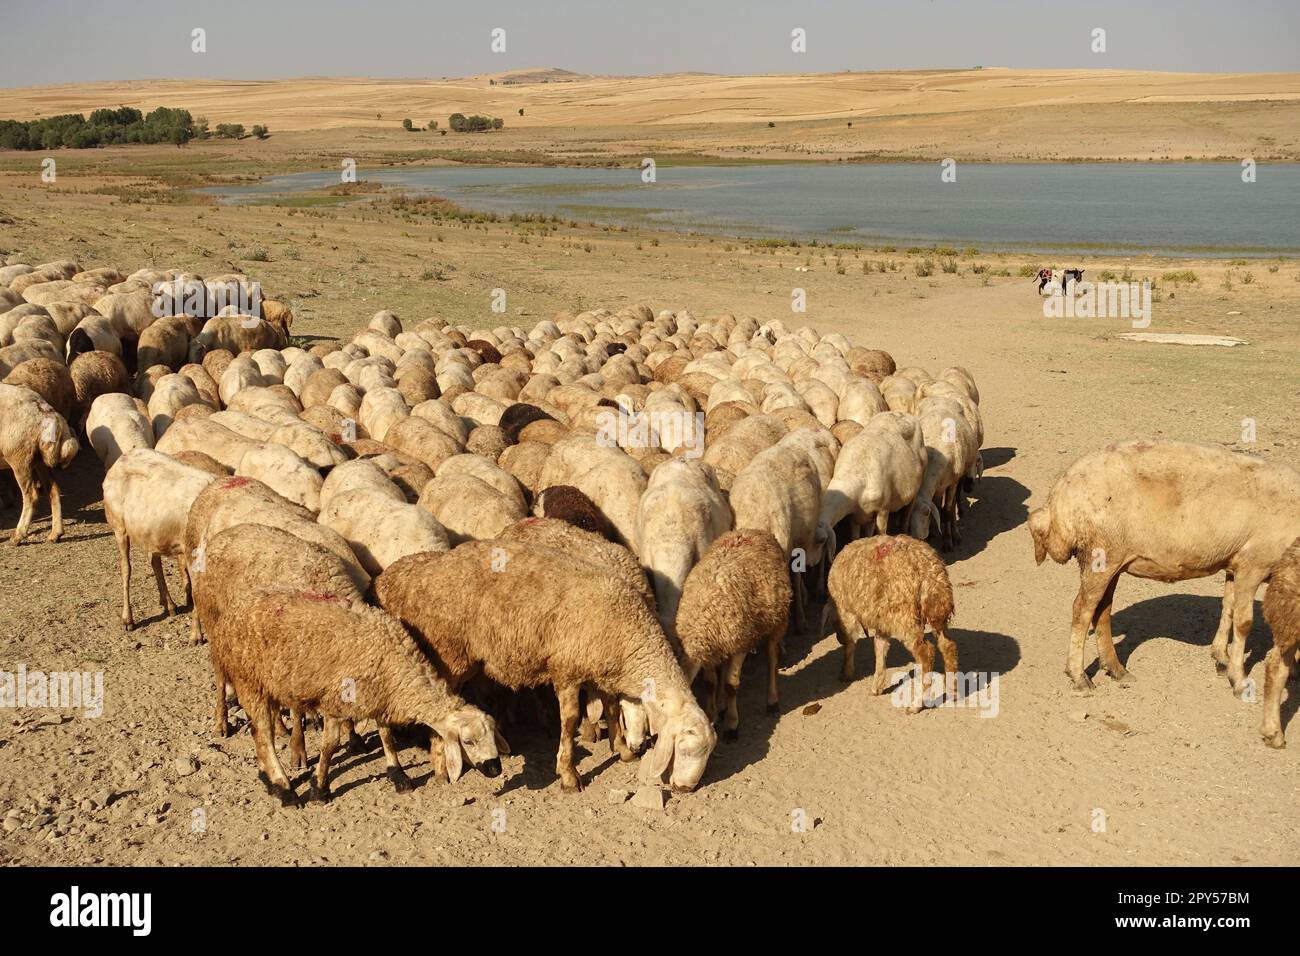 the flock of sheep, overwhelmed by the heat, came close to each other, flock of sheep taken to drink water Stock Photo